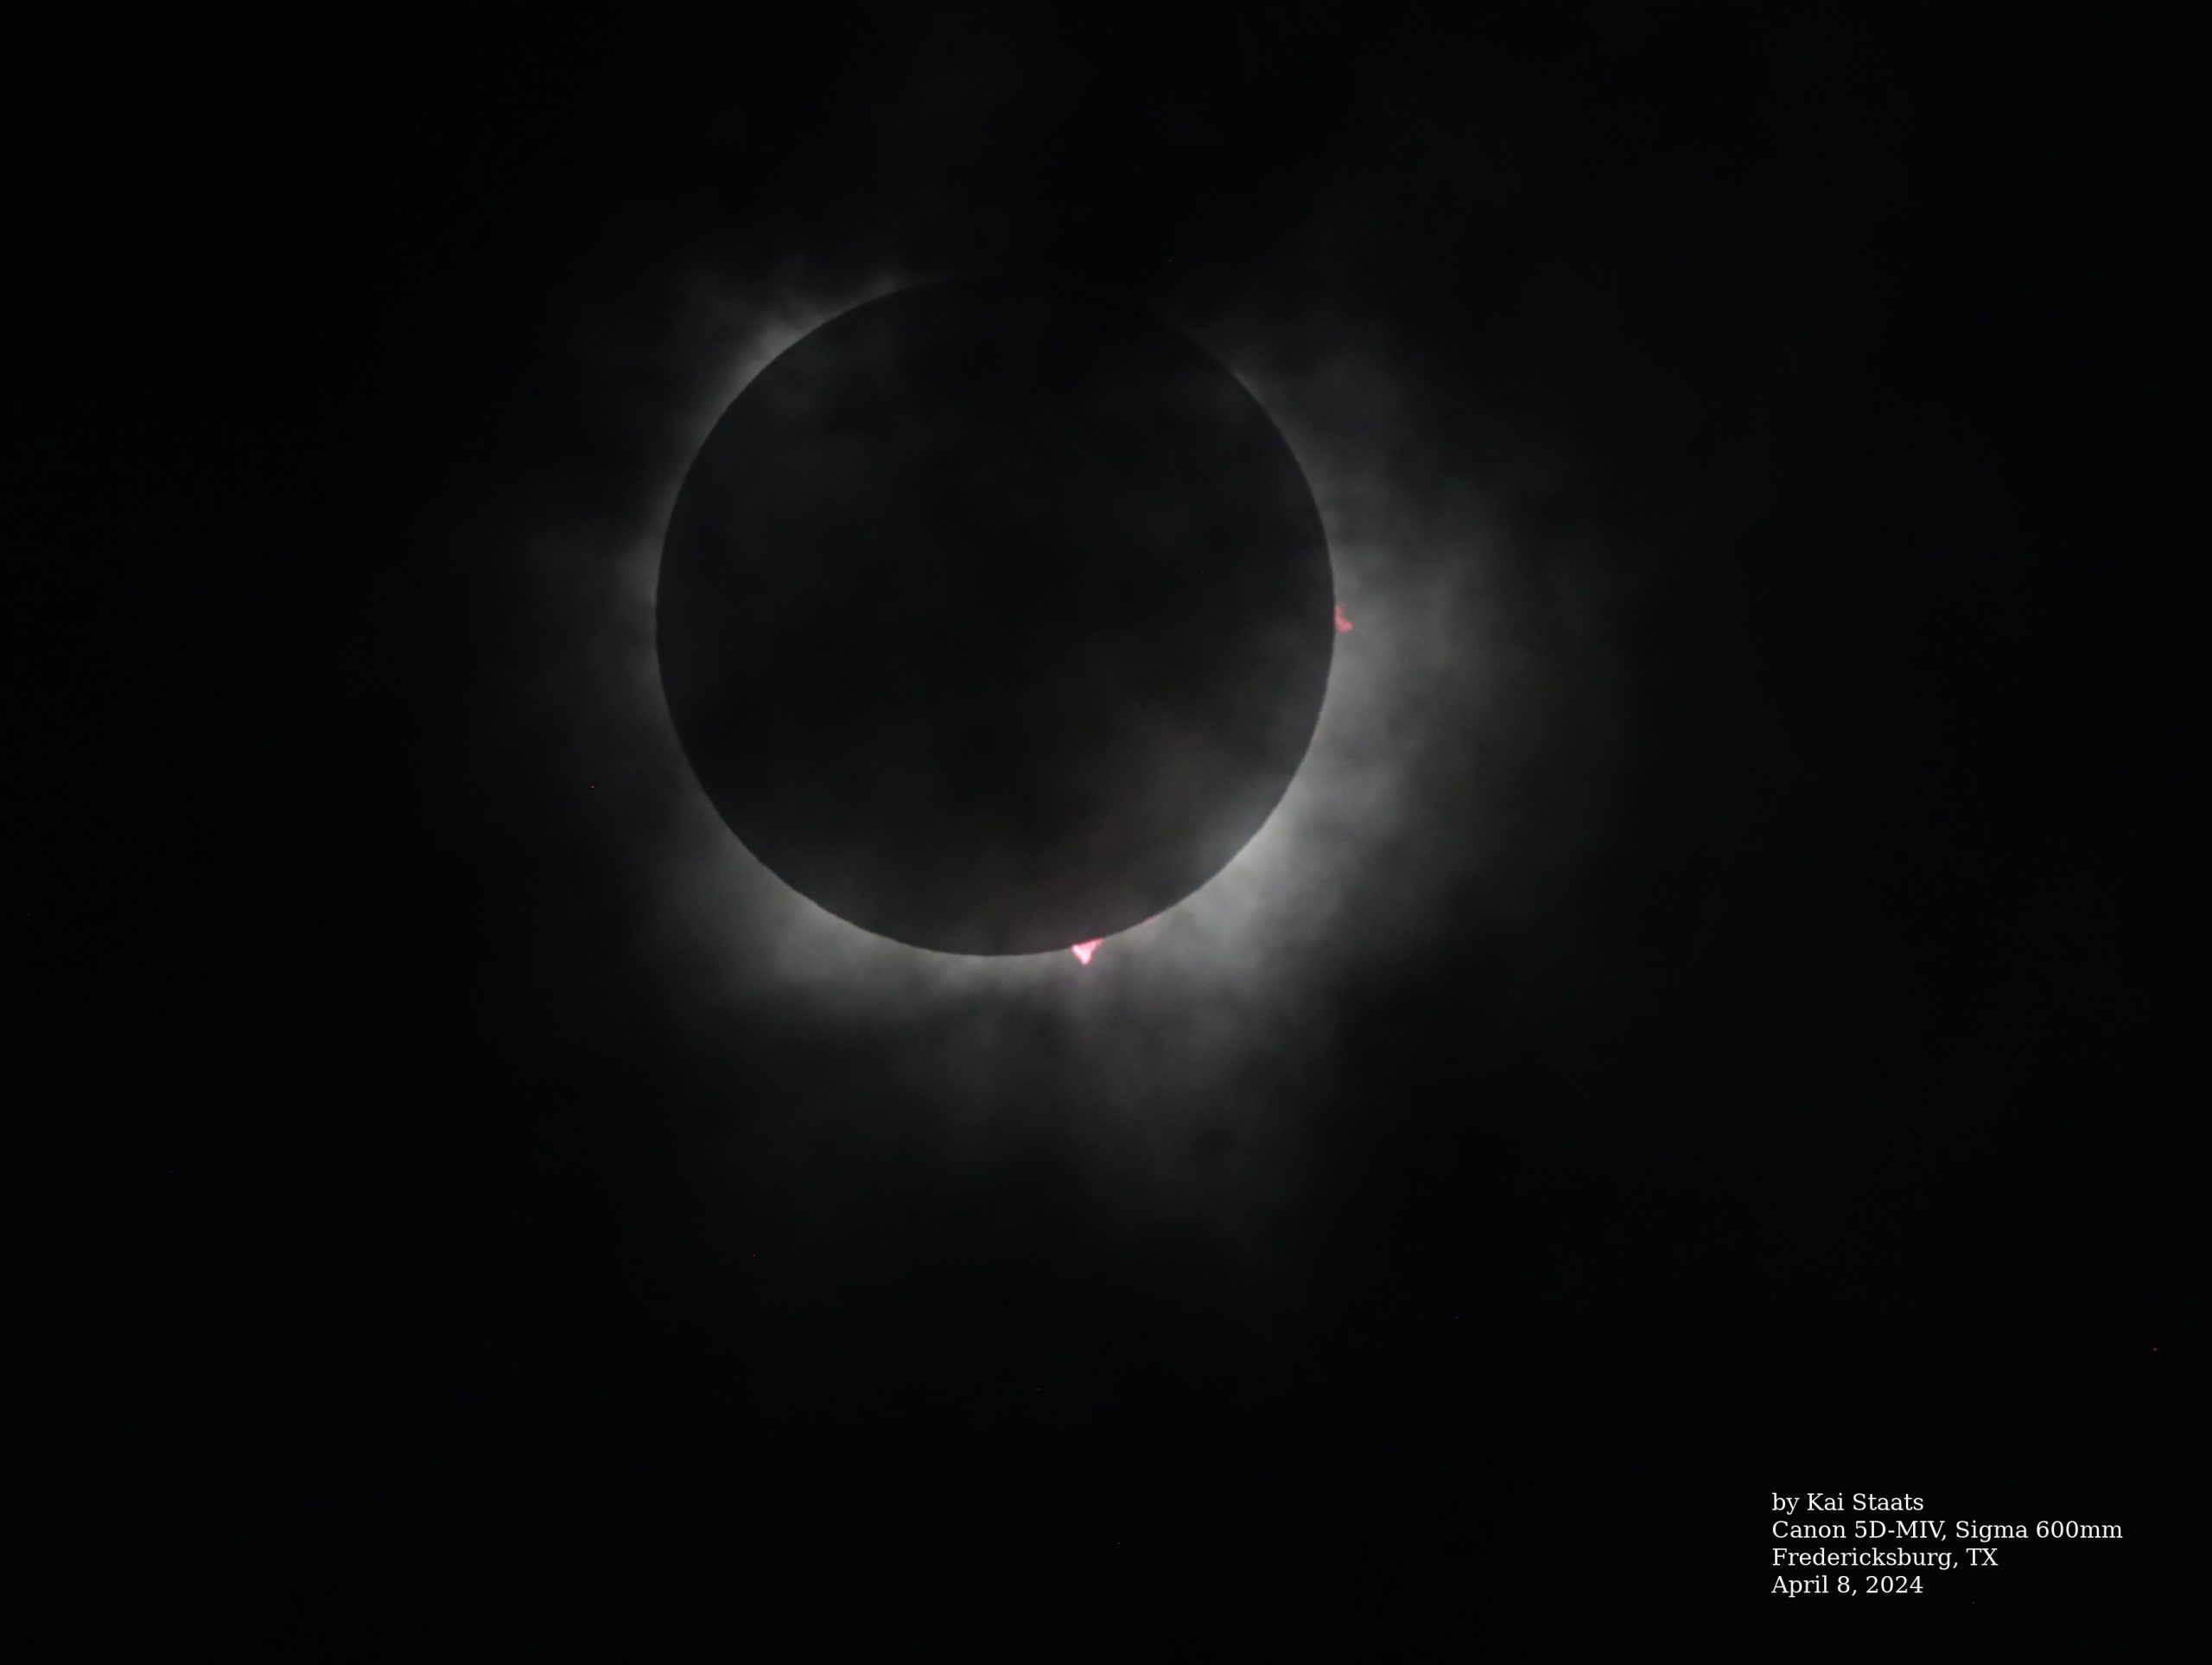 by Kai Staats
Total solar eclipse 2024
Fredericksburg, TX
April 8, 2024
Canon 5D-MIV with Sigma 600mm lens